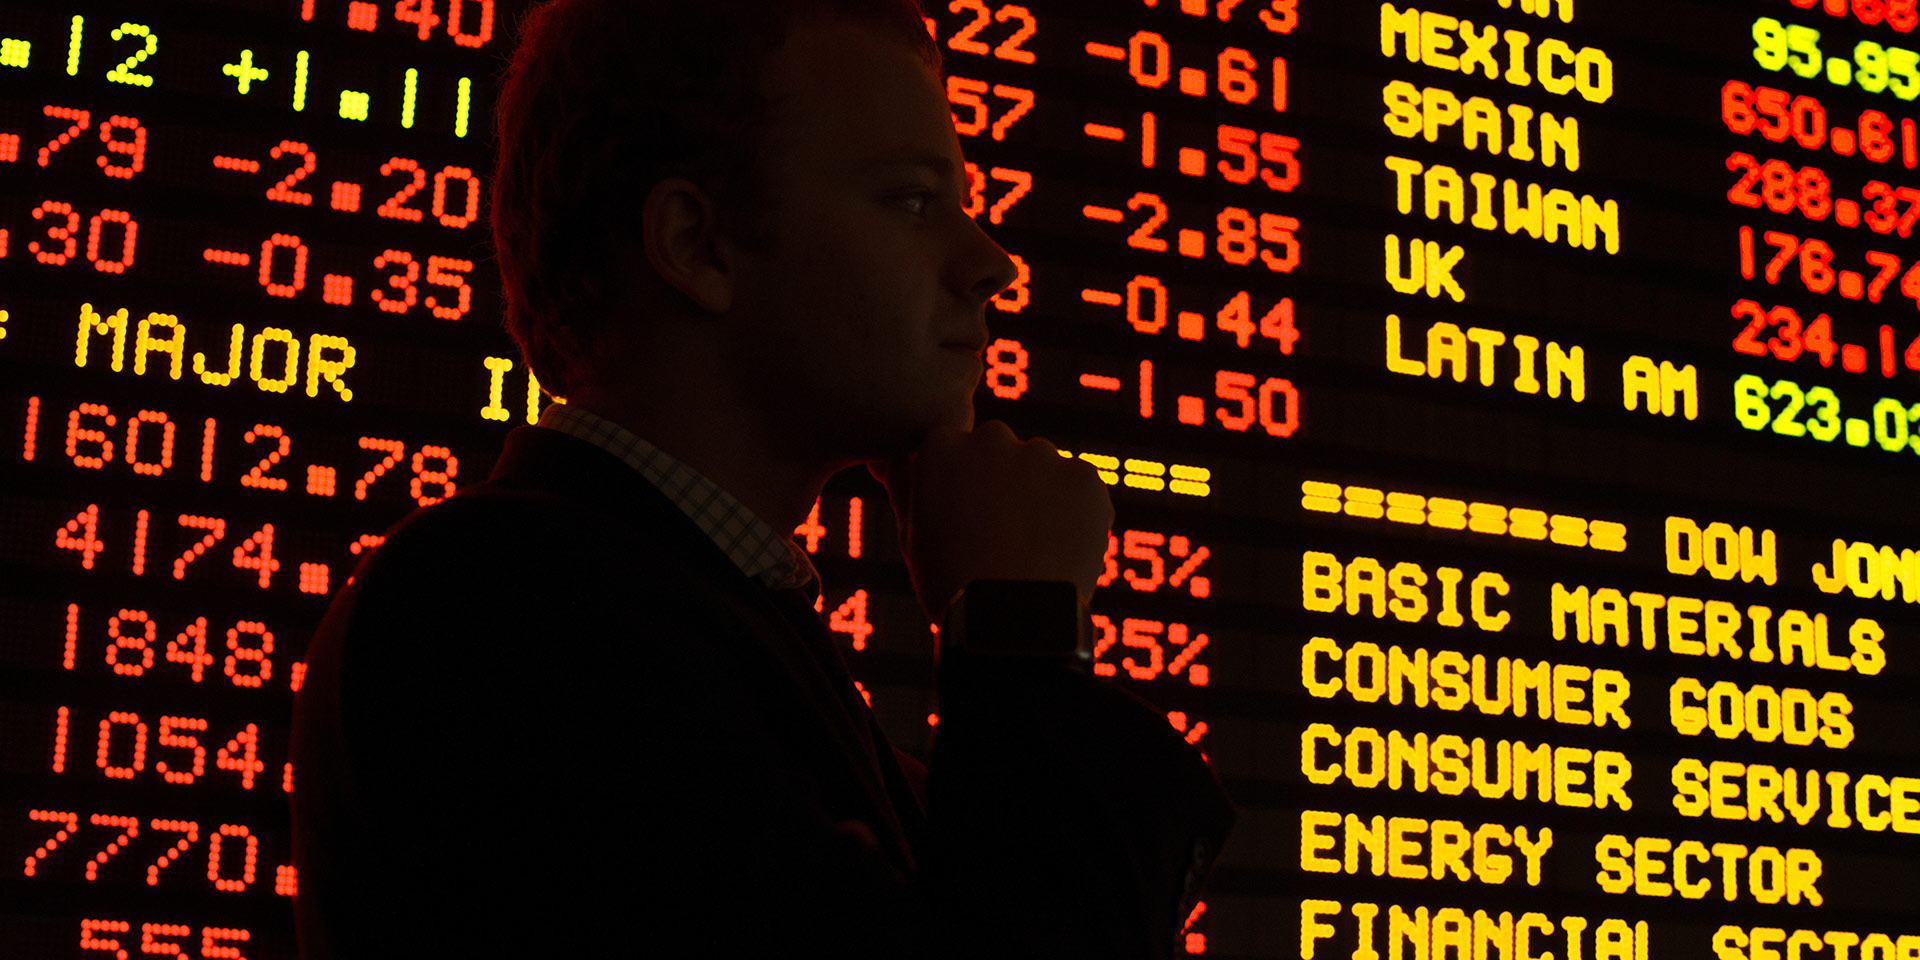 A person stands in front of a large stock ticker board